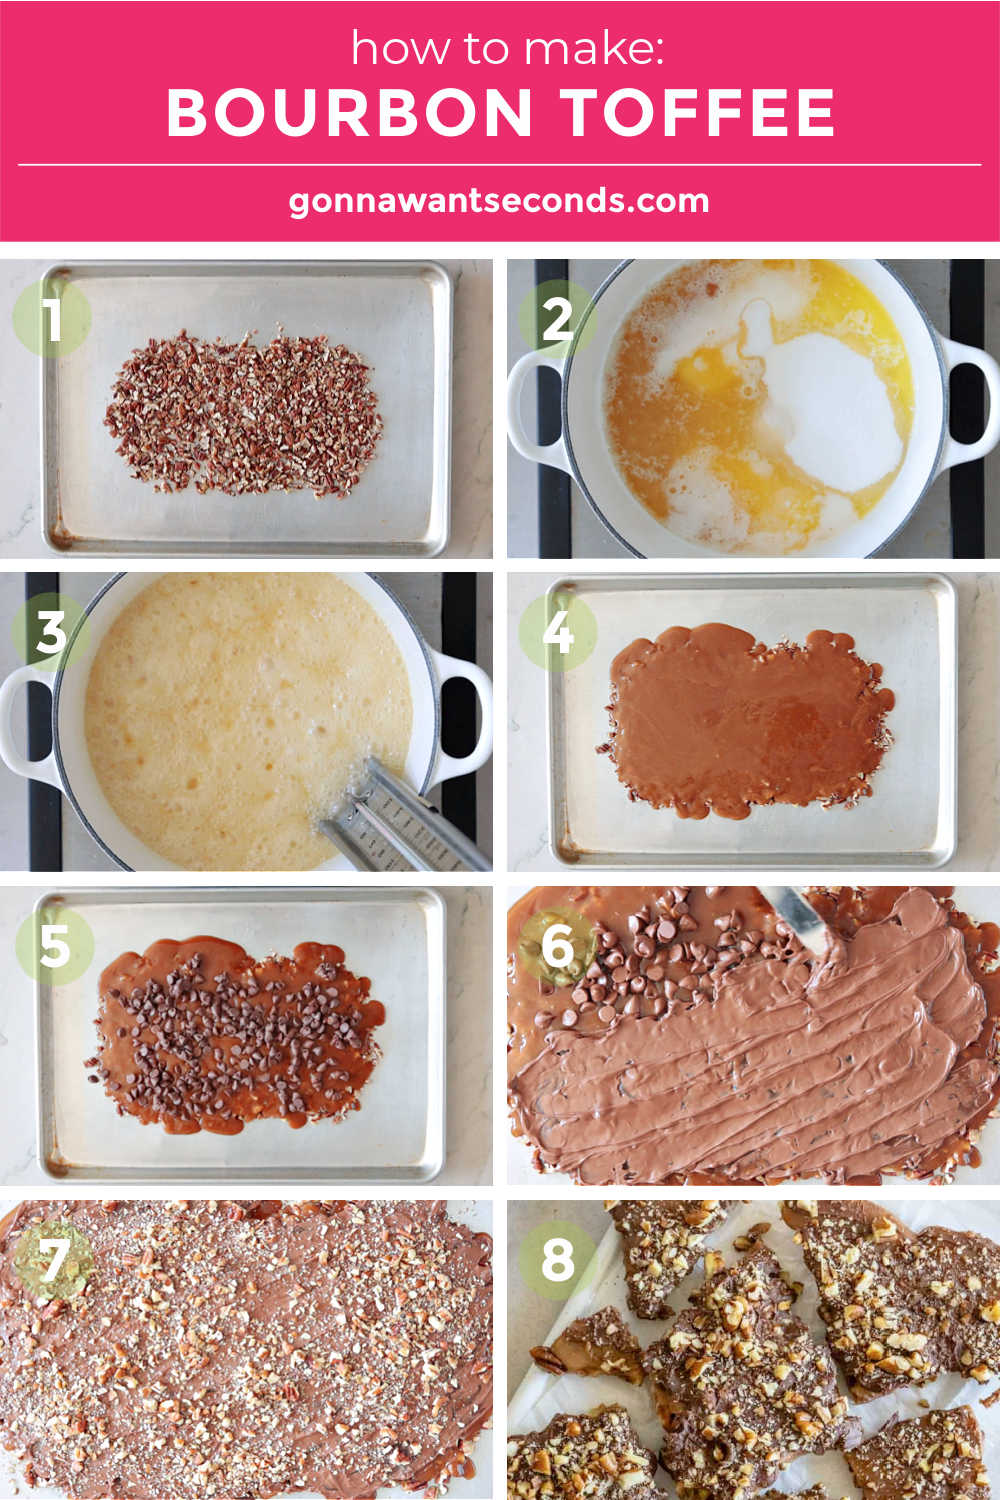 Step by step how to make bourbon toffee